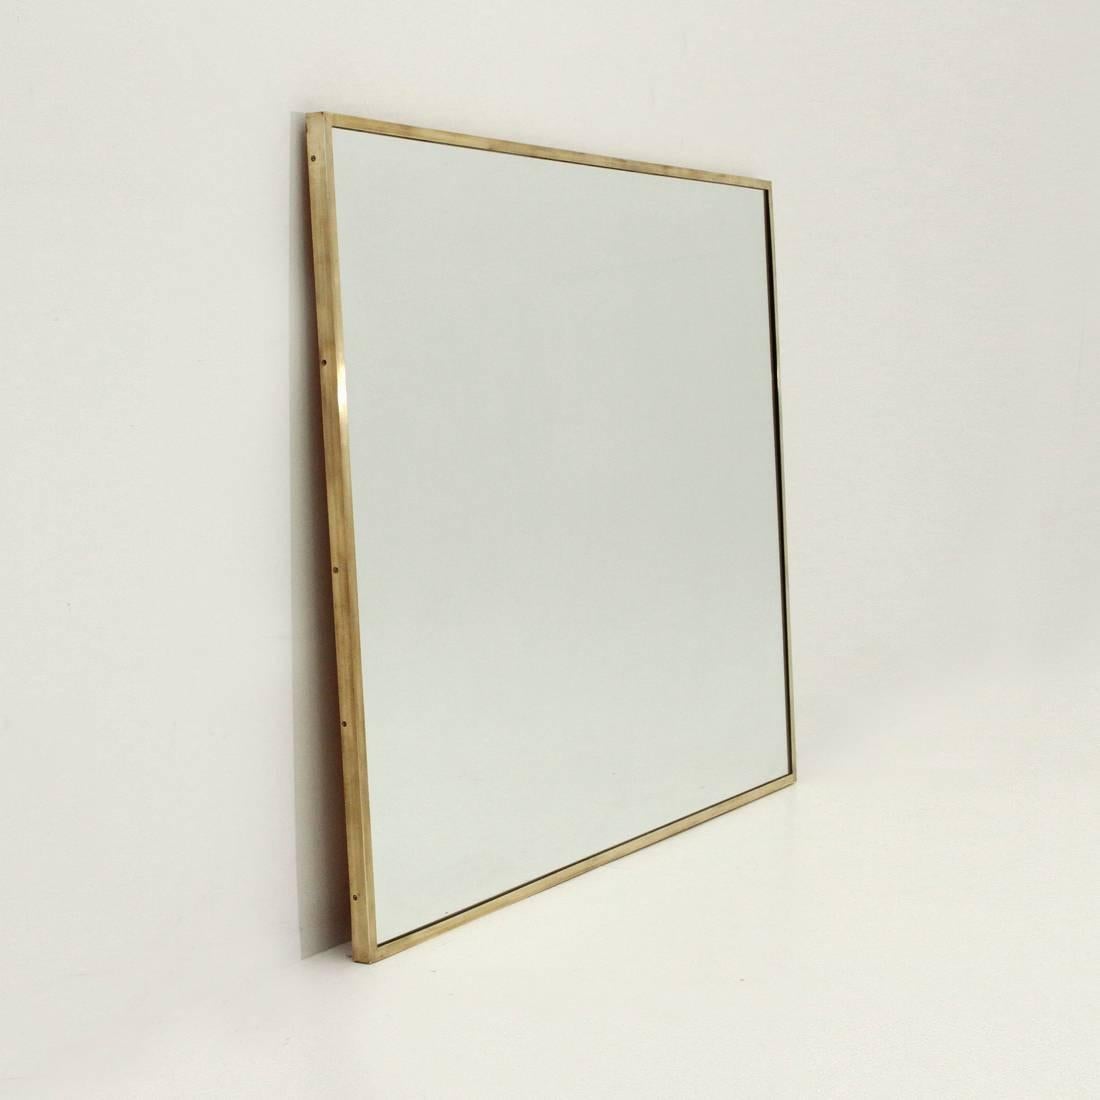 Italian mirror production of 1950s.
Wooden structure, mirrored glass and brass frame.
Good general conditions.

Dimensions: Width 120 cm, depth 3 cm, height 96 cm.